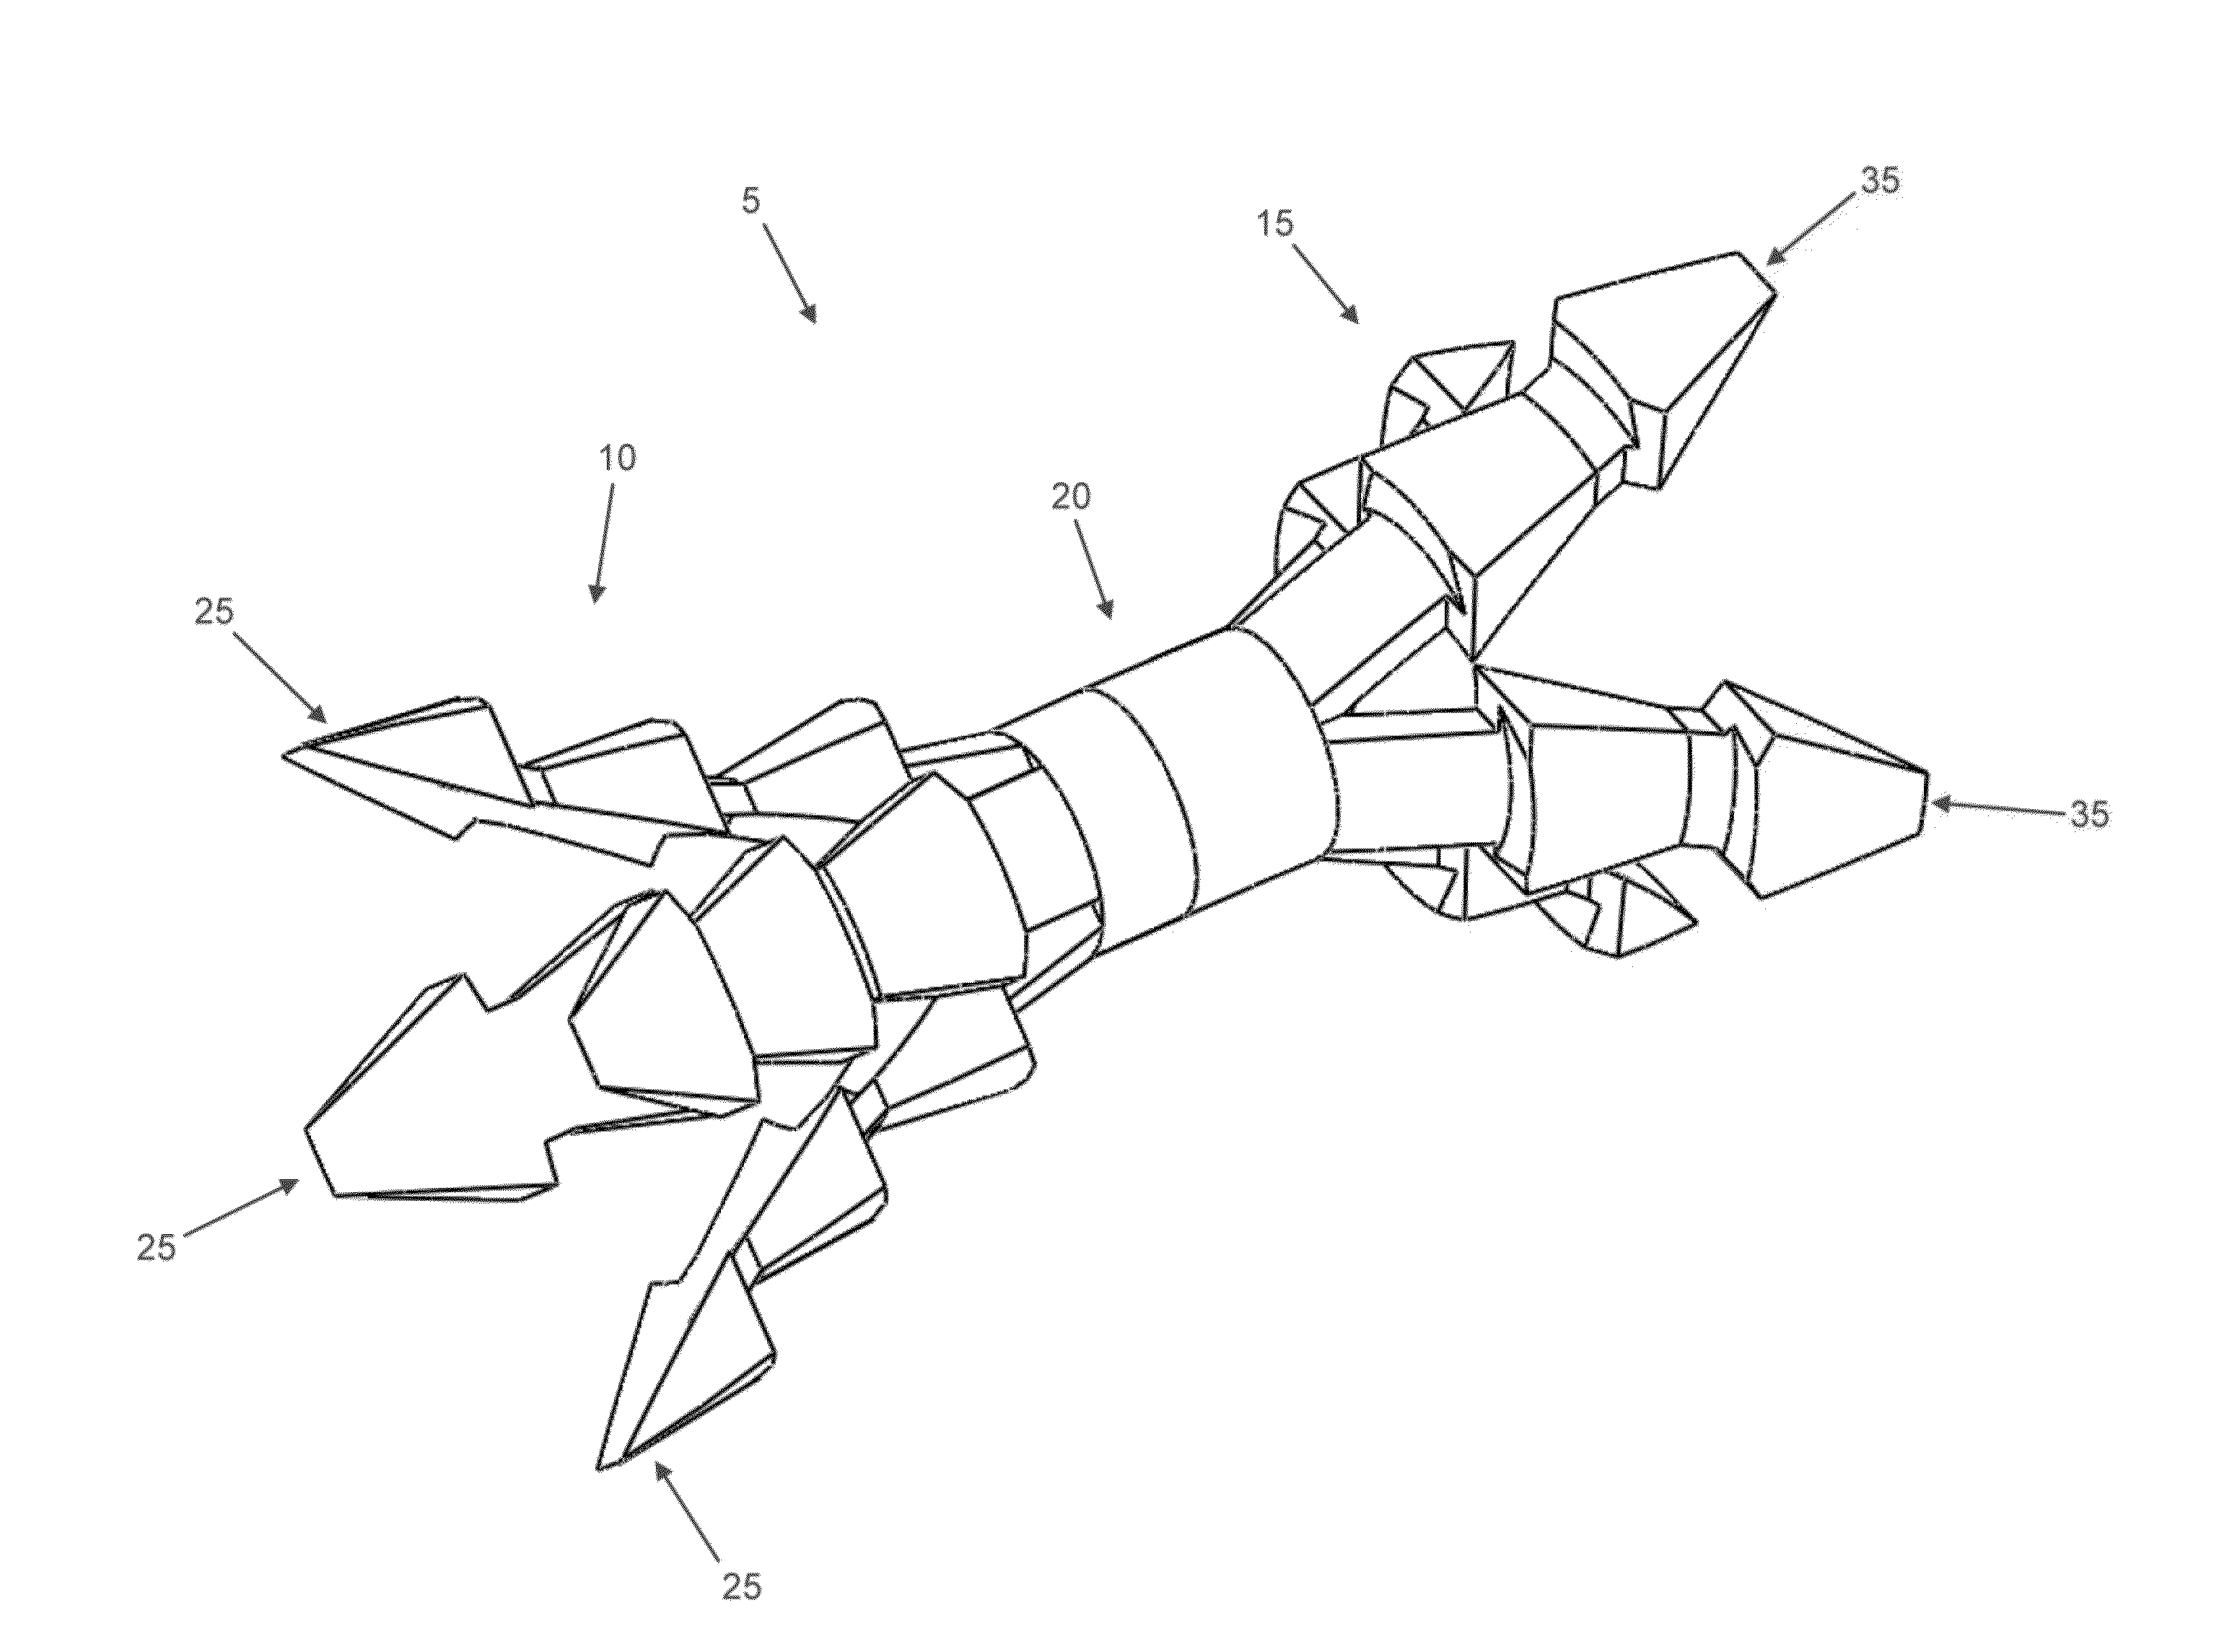 Intermedullary devices for generating and applying compression within a body